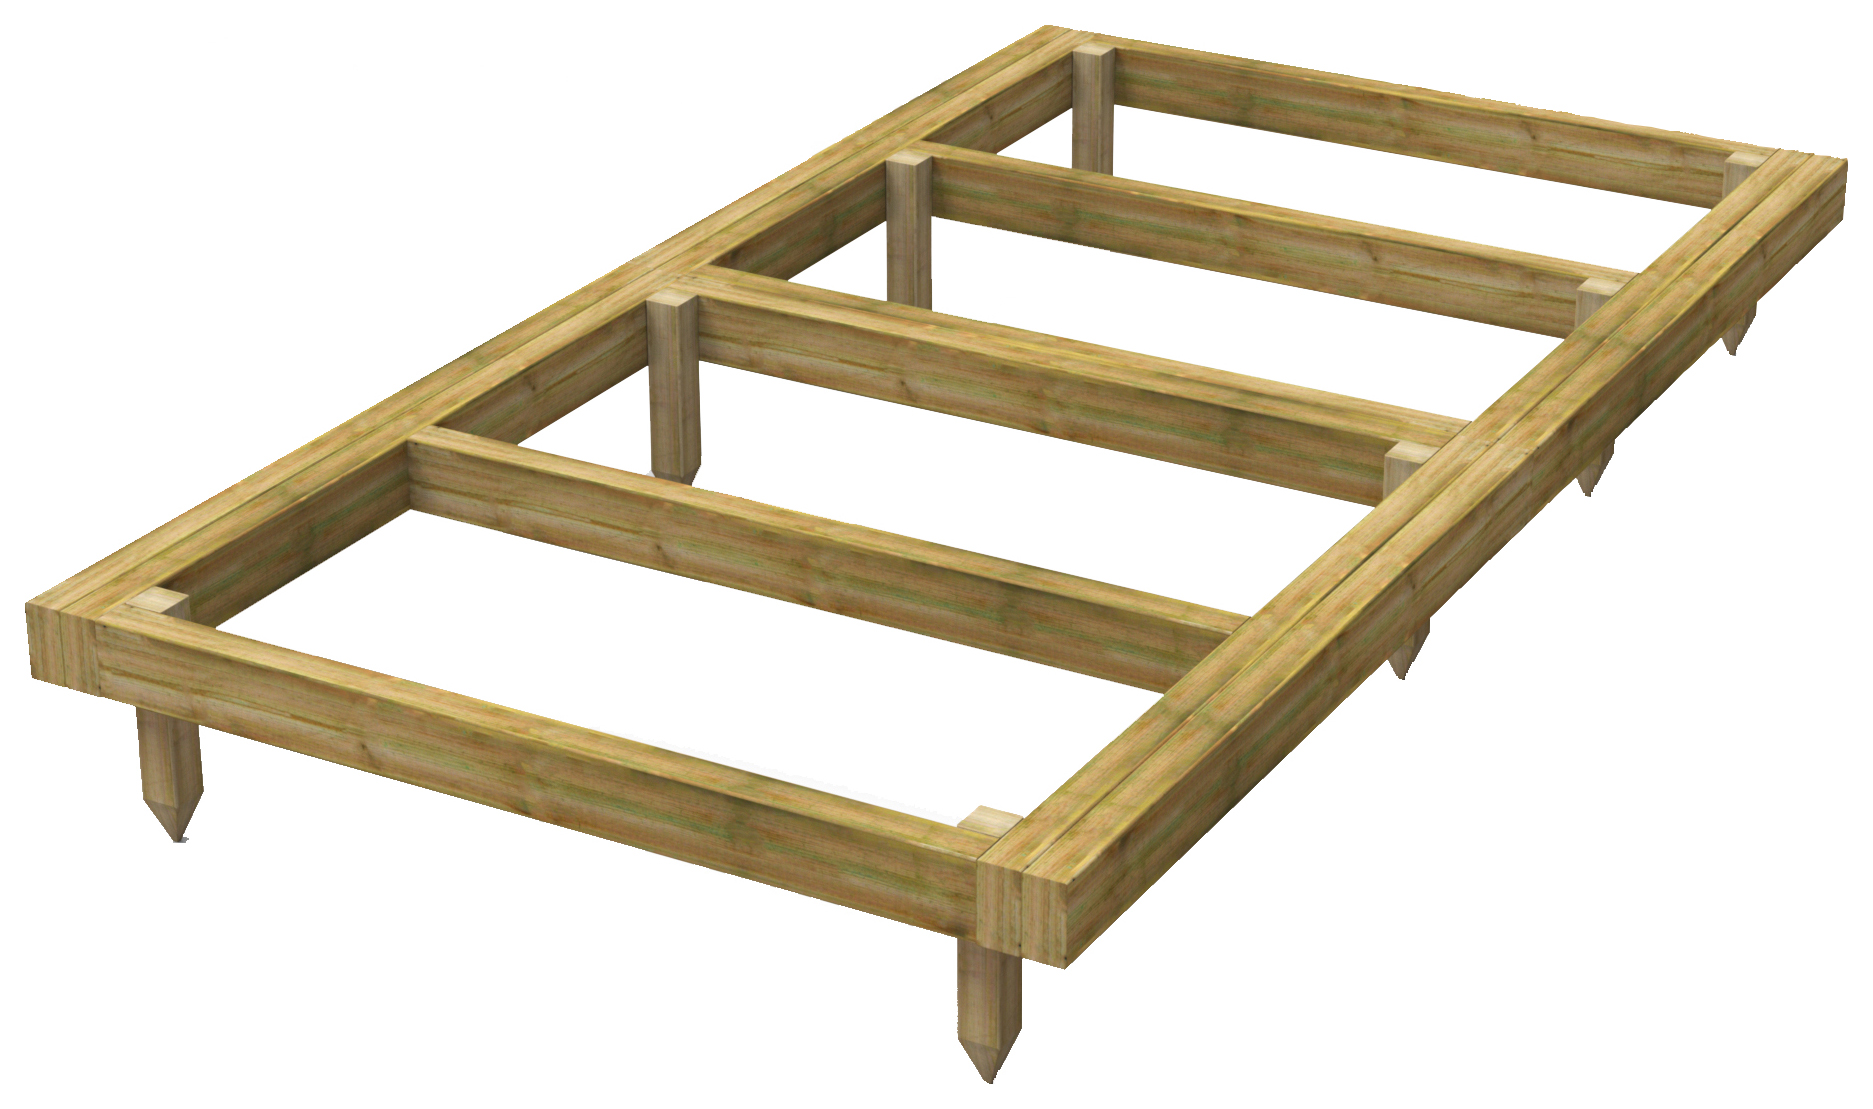 Image of Power Sheds 4 x 8ft Pressure Treated Garden Building Base Kit